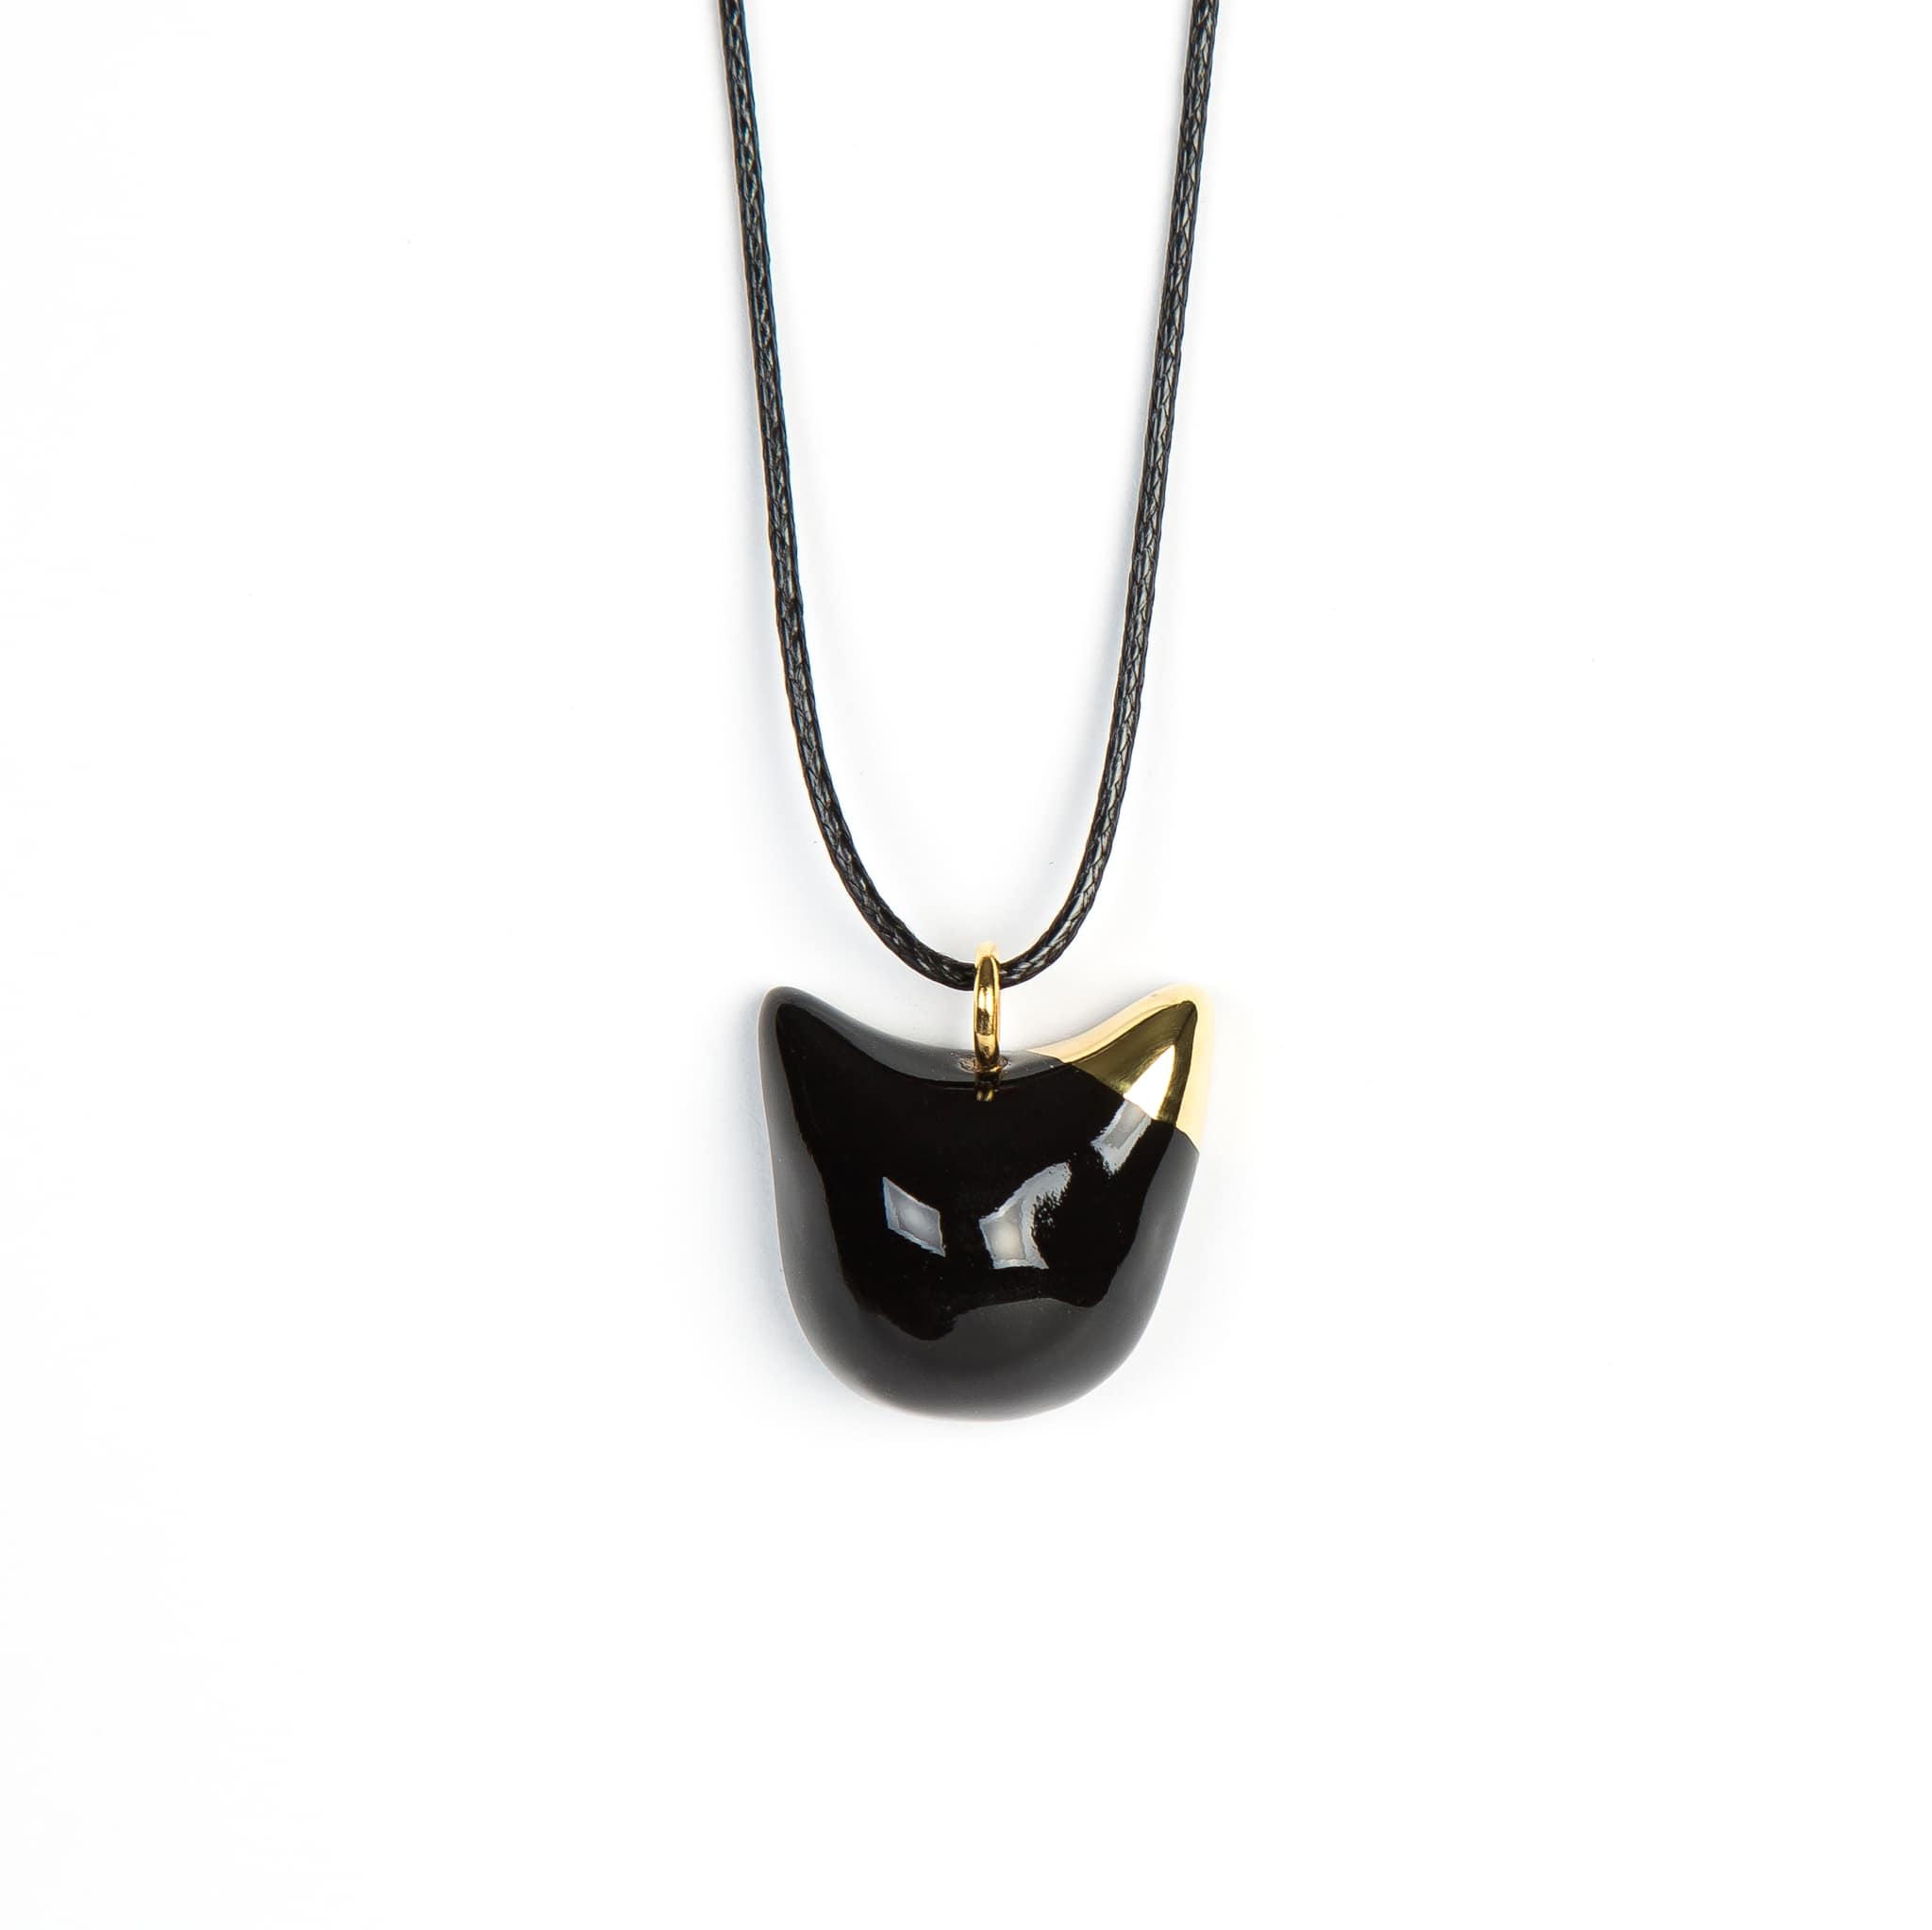 The Black Cat Necklace With Adjustable Cord